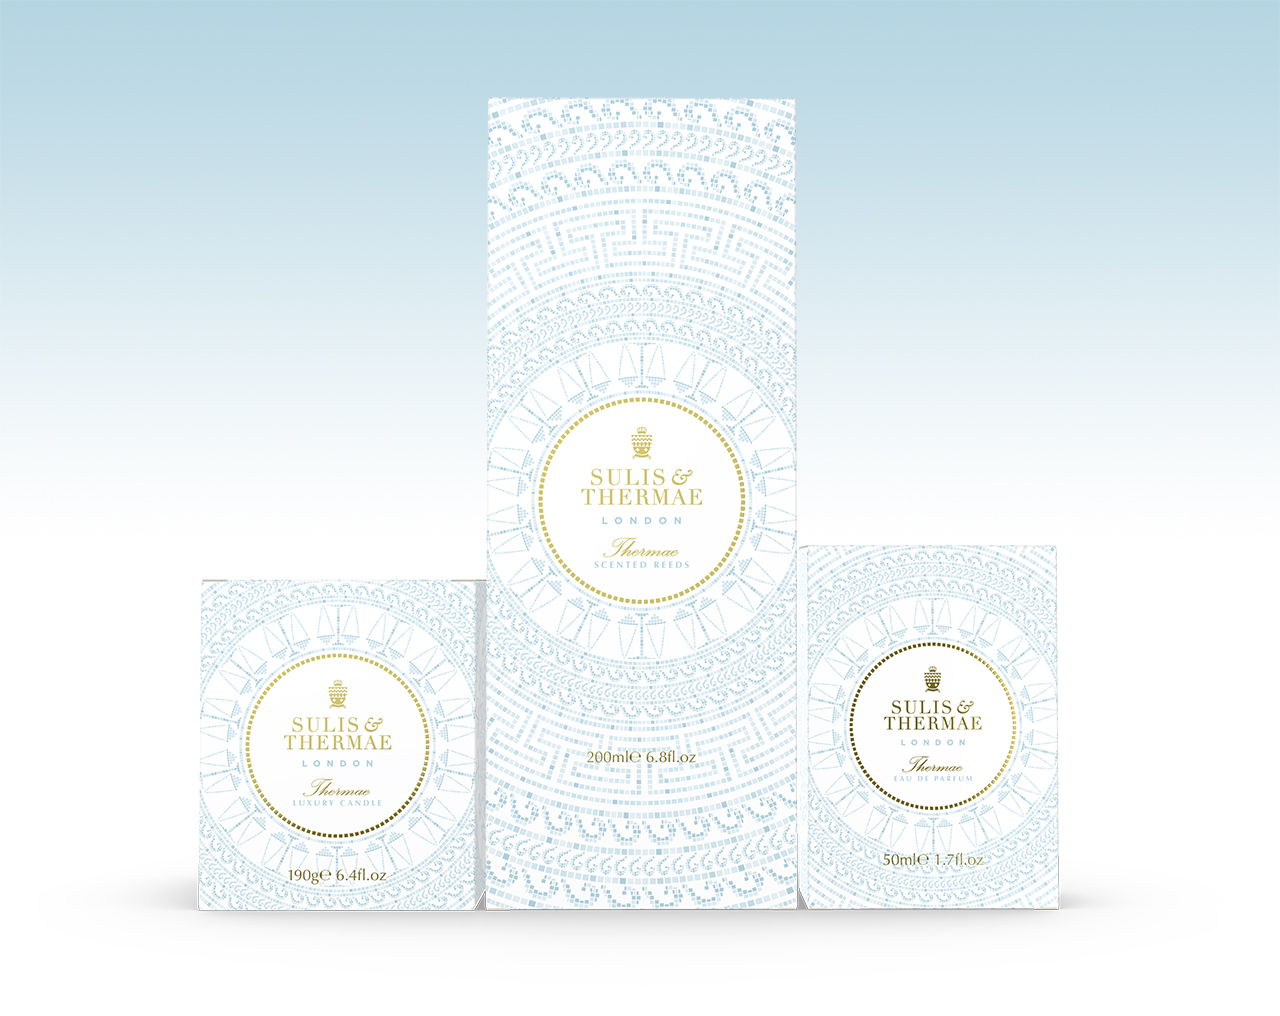 Luxury fragrance carton design for Sulis and Thermae's new product range designed by Paul Cartwright Branding.